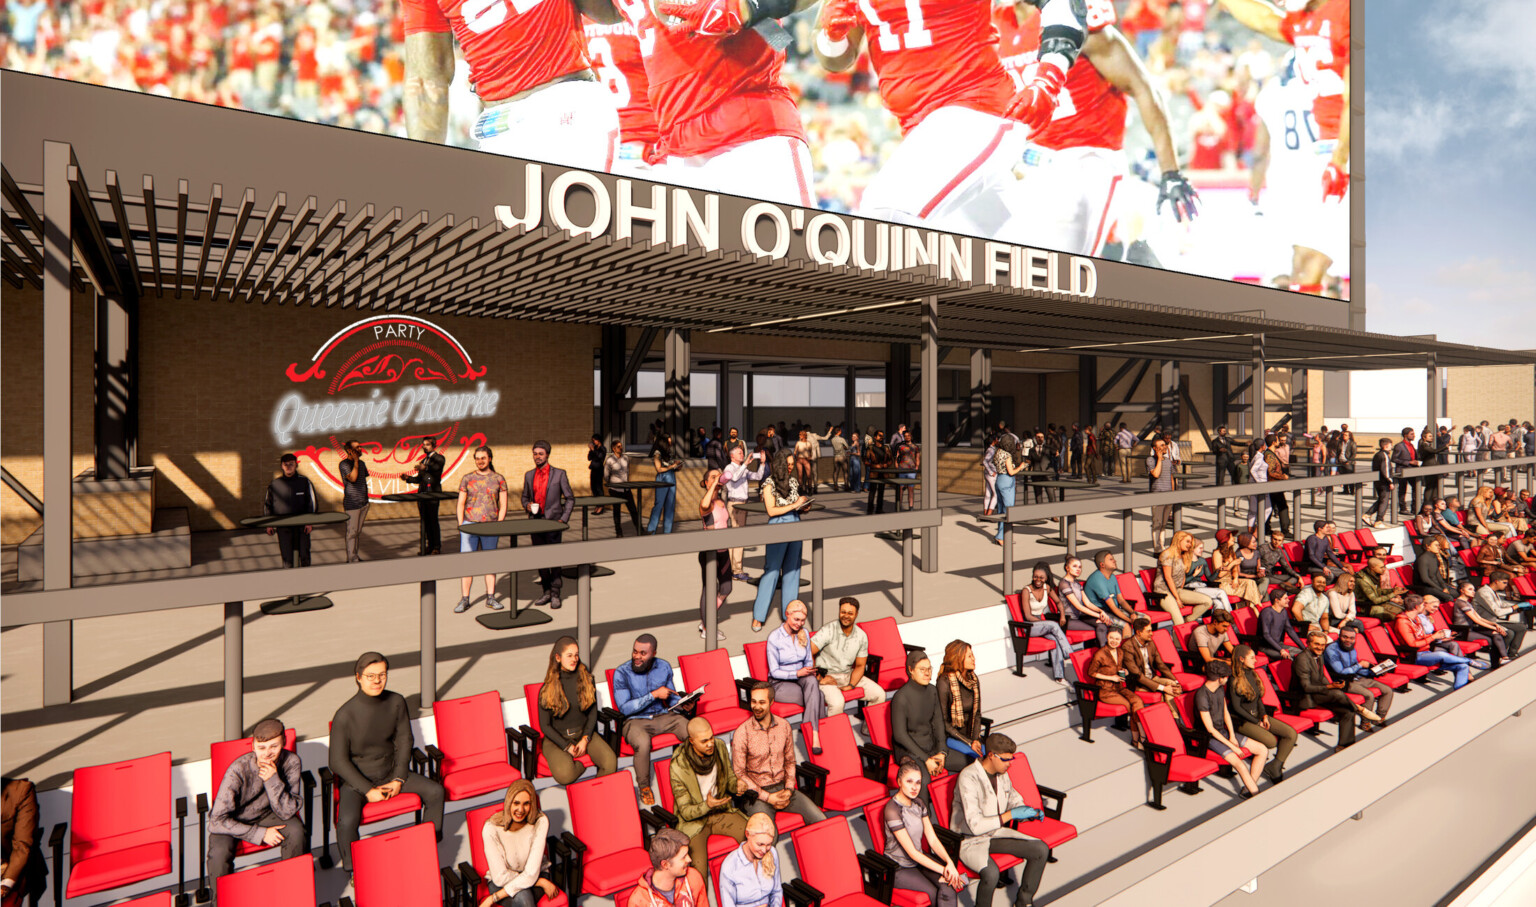 Outdoor patio with large screen, red seating filled with people with branding on the back walls